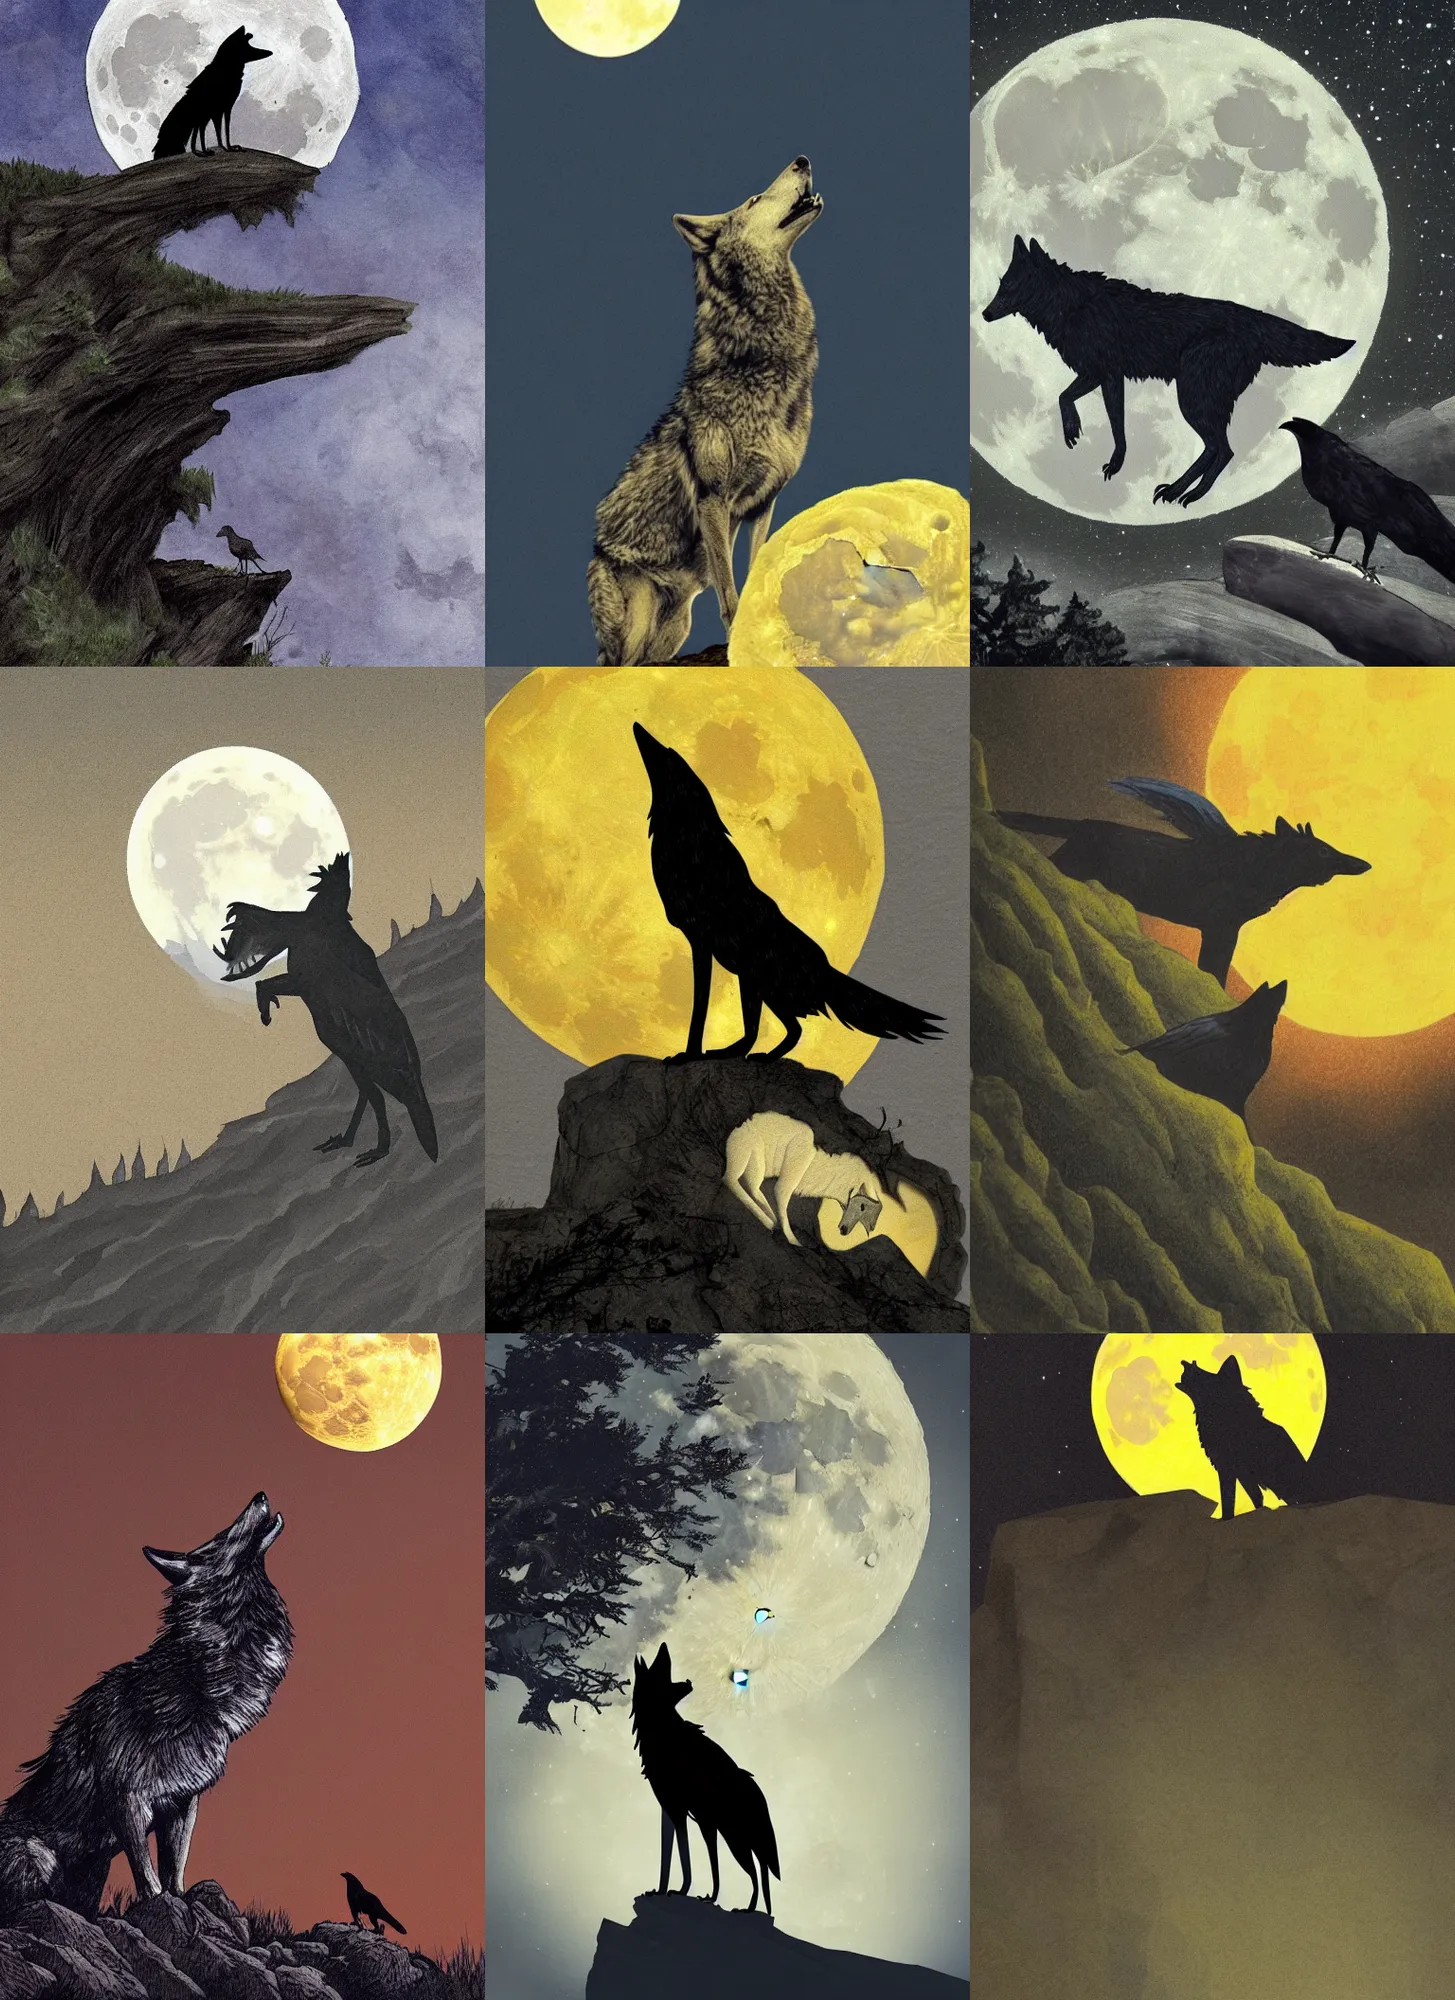 Prompt: A wolf with the head of a crow, perched upon a cliff's edge, howling at a yellowish full moon overlooking a dark forest